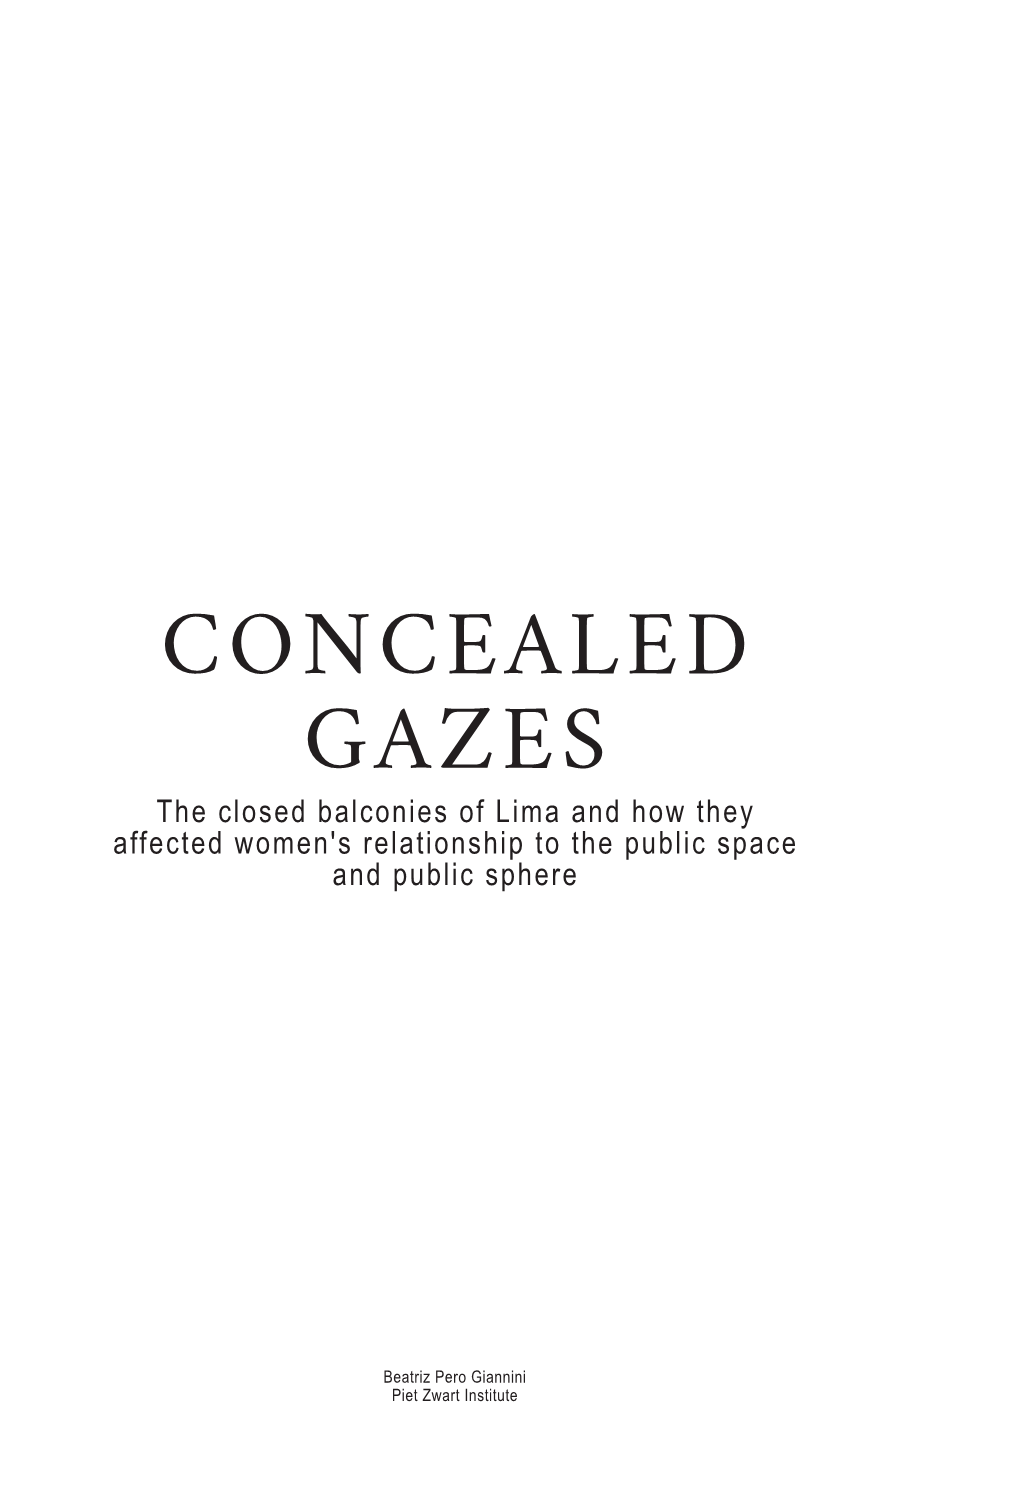 CONCEALED GAZES the Closed Balconies of Lima and How They Affected Women's Relationship to the Public Space and Public Sphere